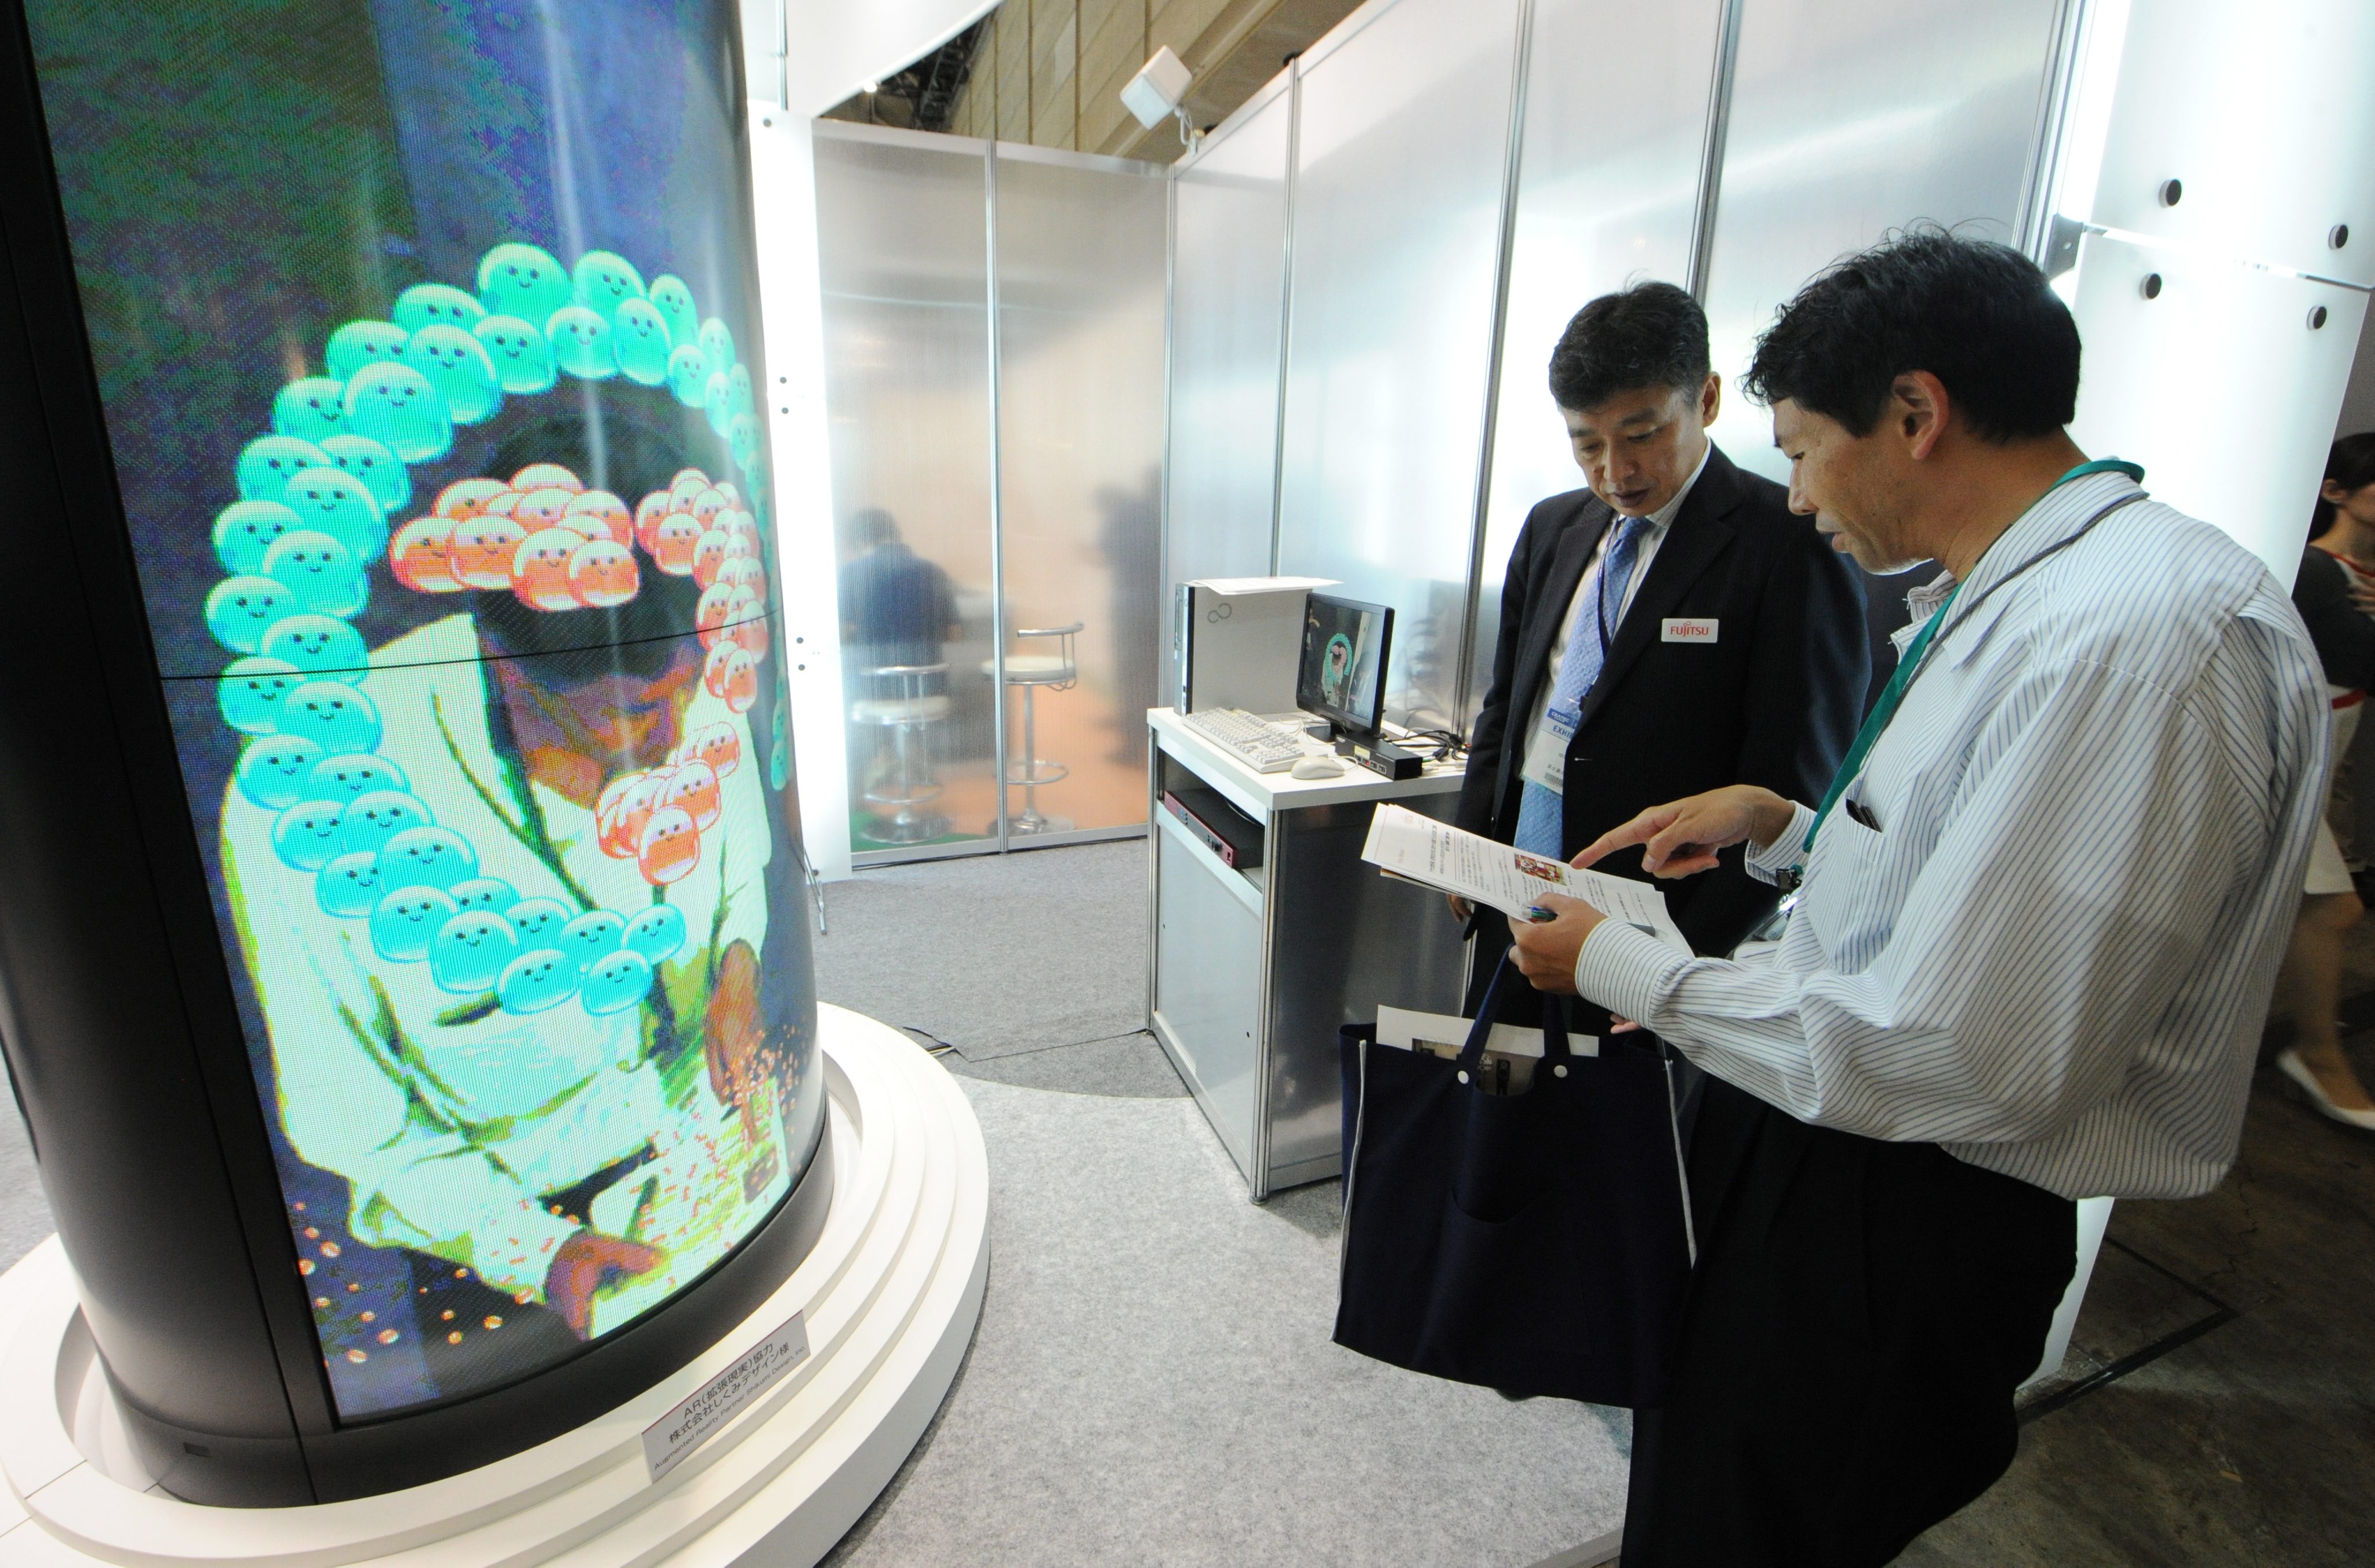 AUGMENTED REALITY. Visitors look at Fujitsu Corporation's AR technology at Japan CEATEC in Makuhari, Japan, October 5, 2010. File photo by Everett Kennedy Brown/EPA 